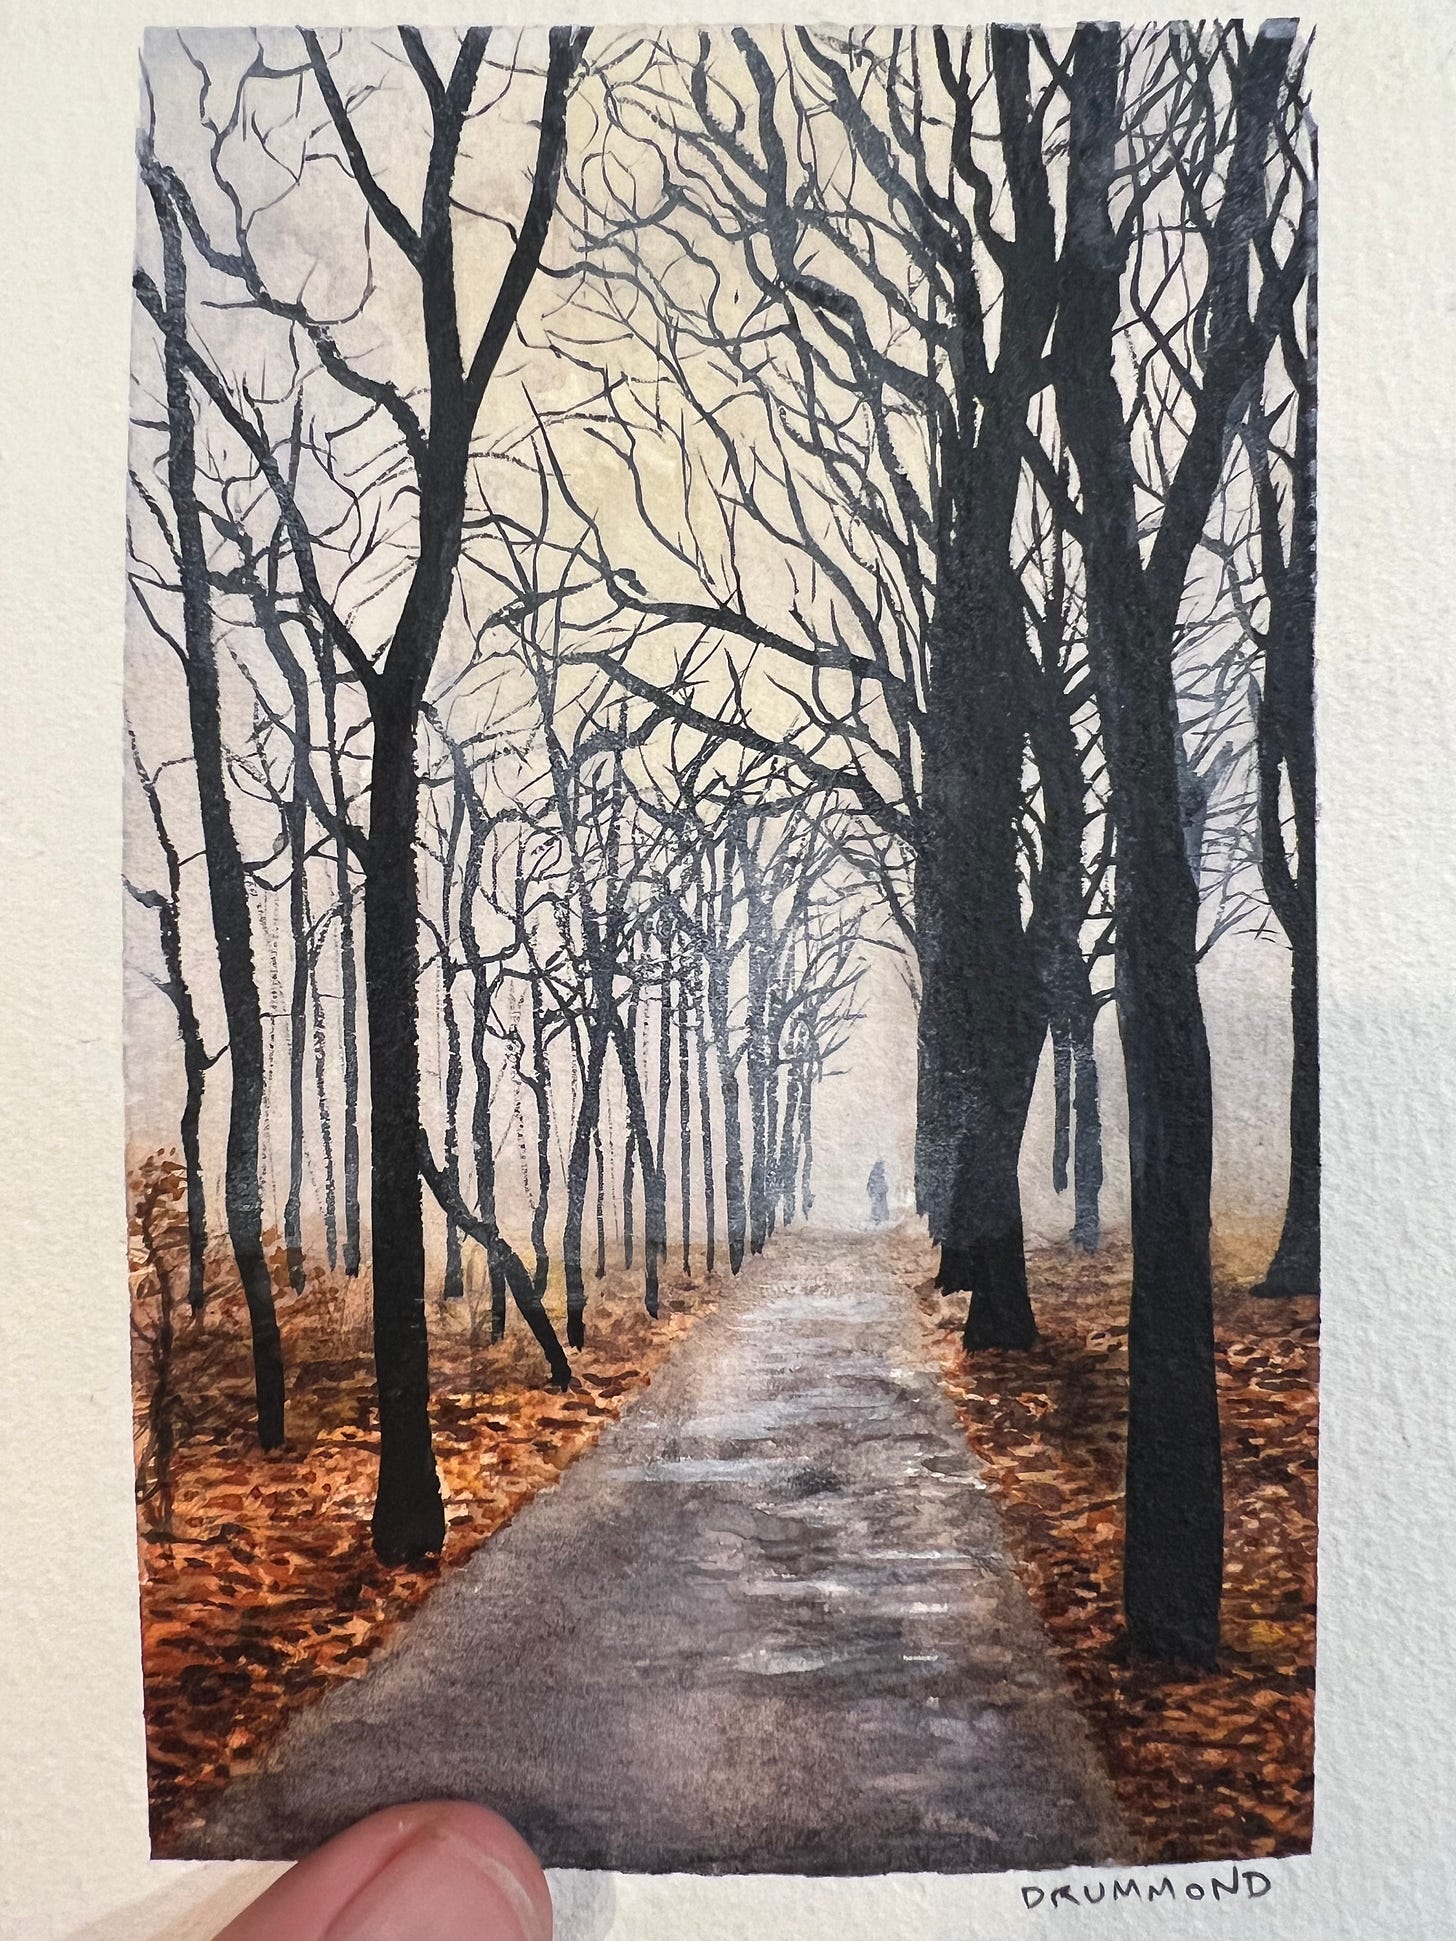 A watercolour painting of a tree-lined bike path in autumn. A cyclist is visible in the distance as a dark blob of some kind.